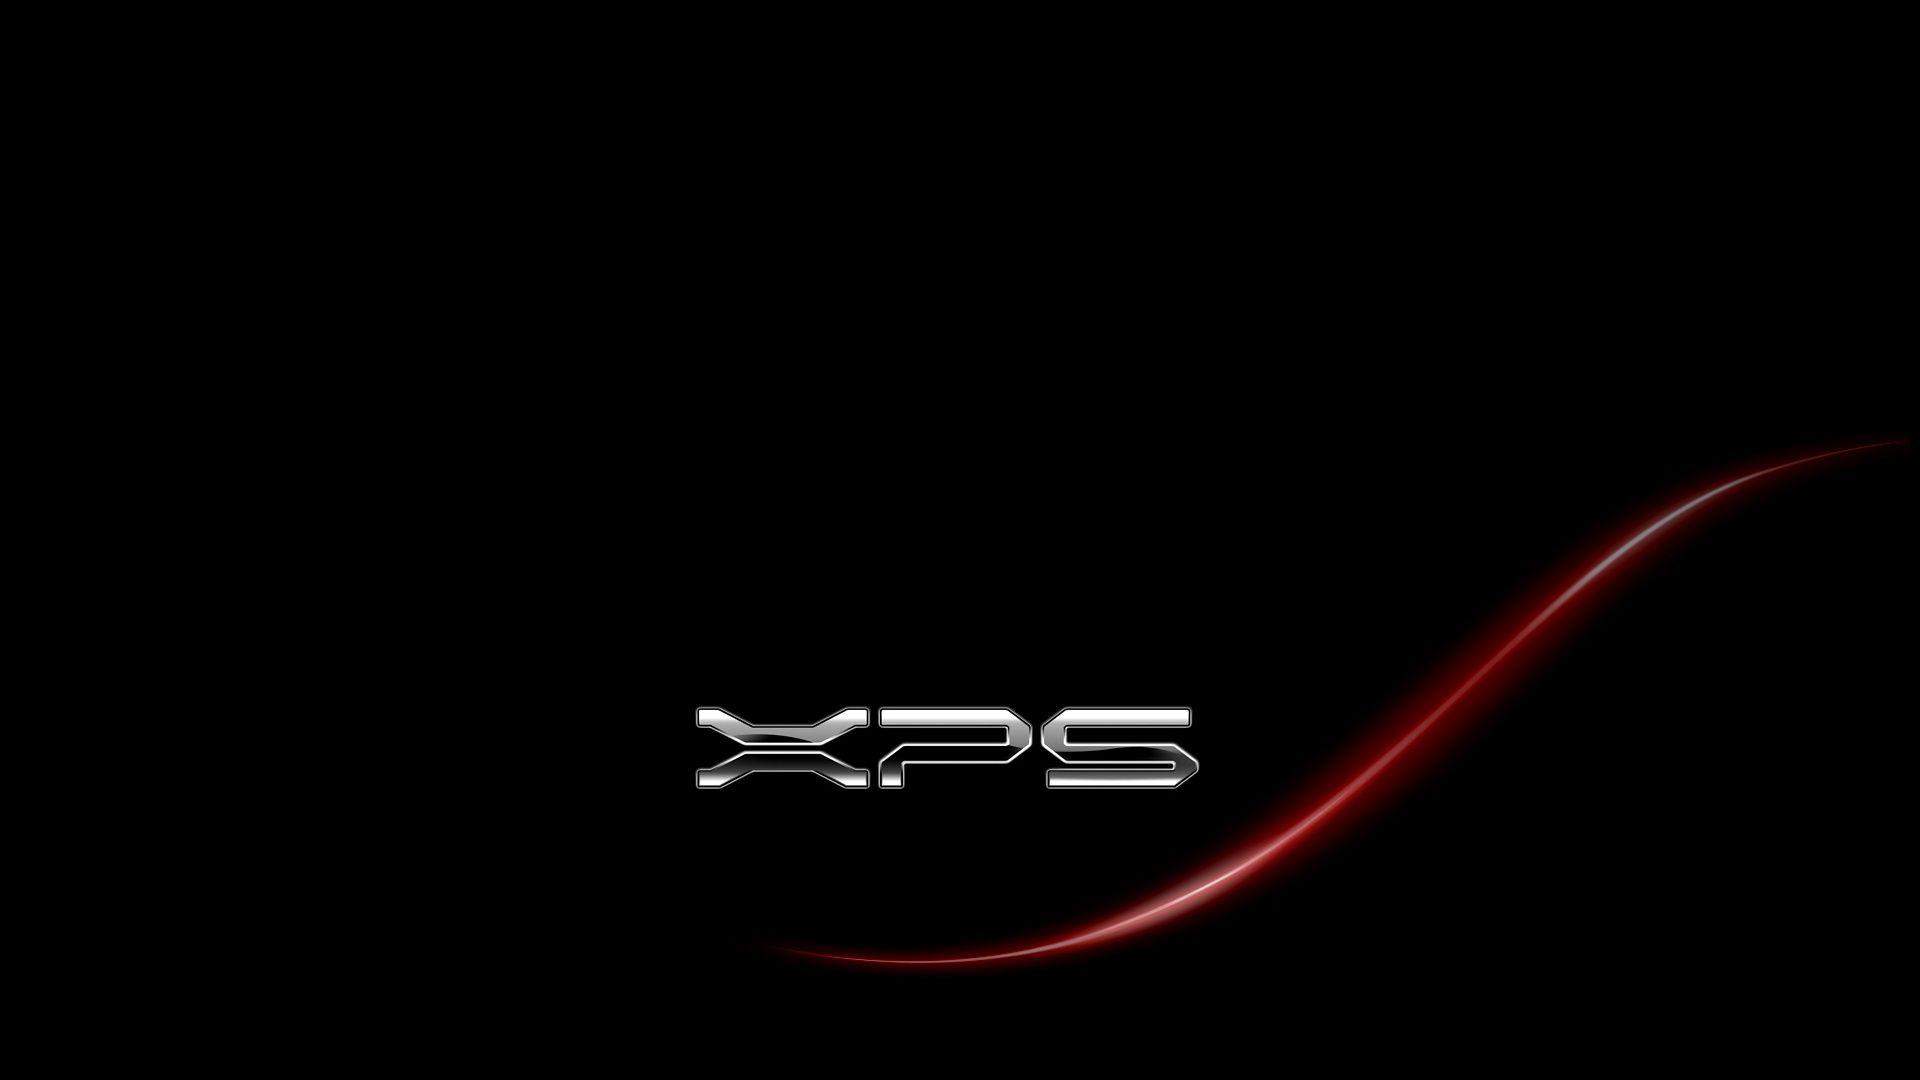 Red Gaming PC Wallpapers - Top Free Red Gaming PC Backgrounds ...